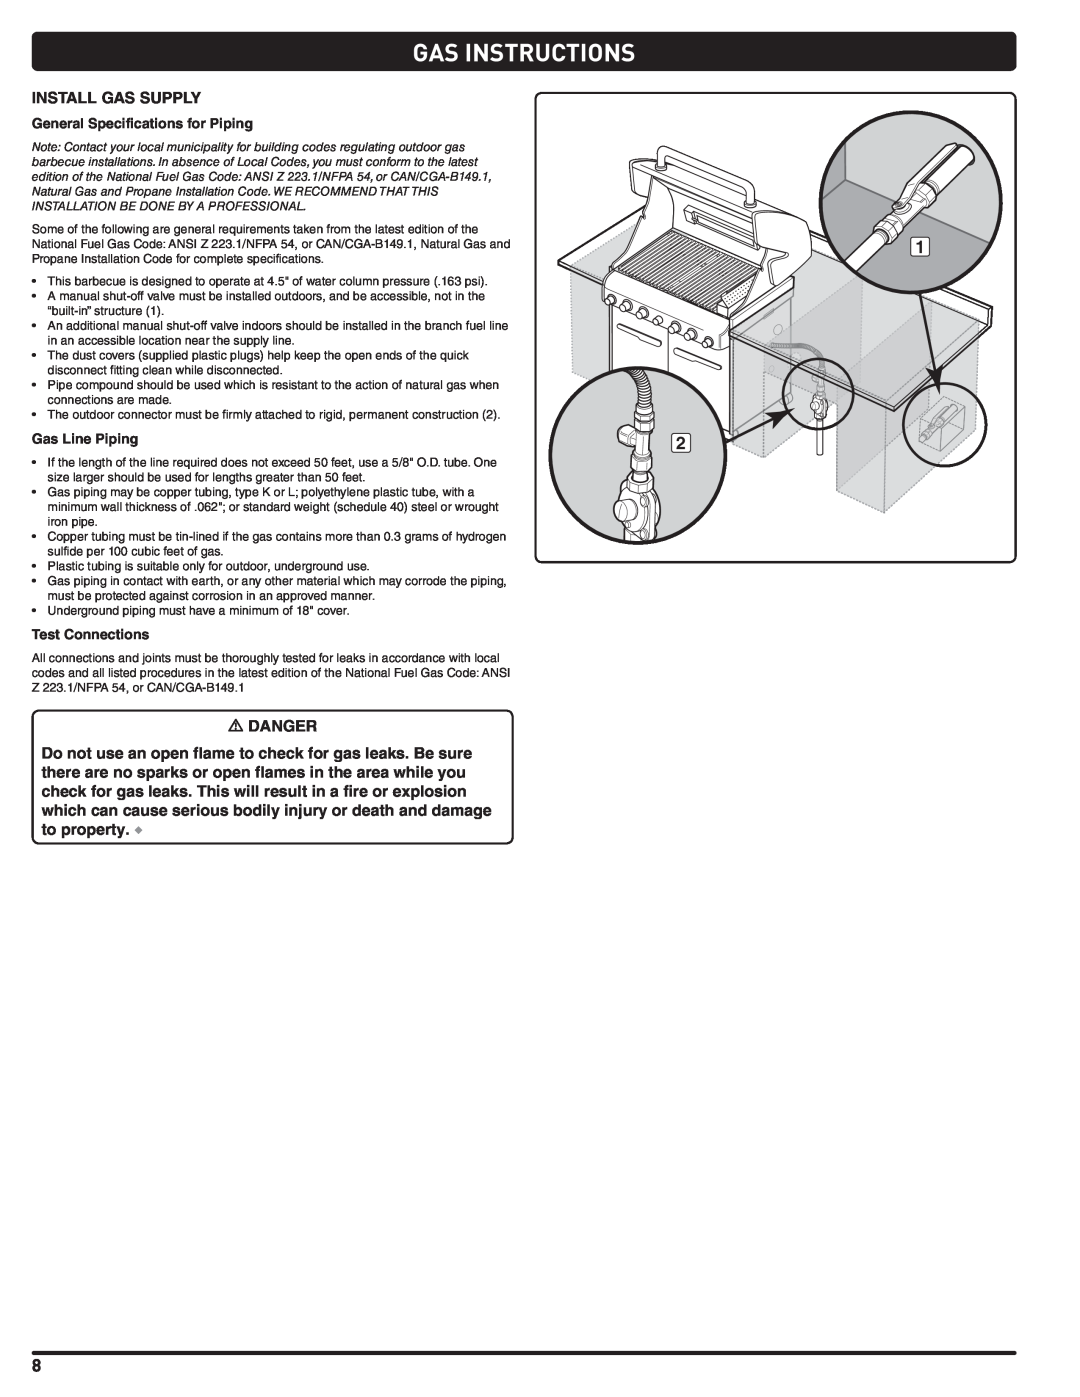 Weber Summit Gas Grill, 56576 manual Gas Instructions, General Specifications for Piping, Gas Line Piping, Test Connections 